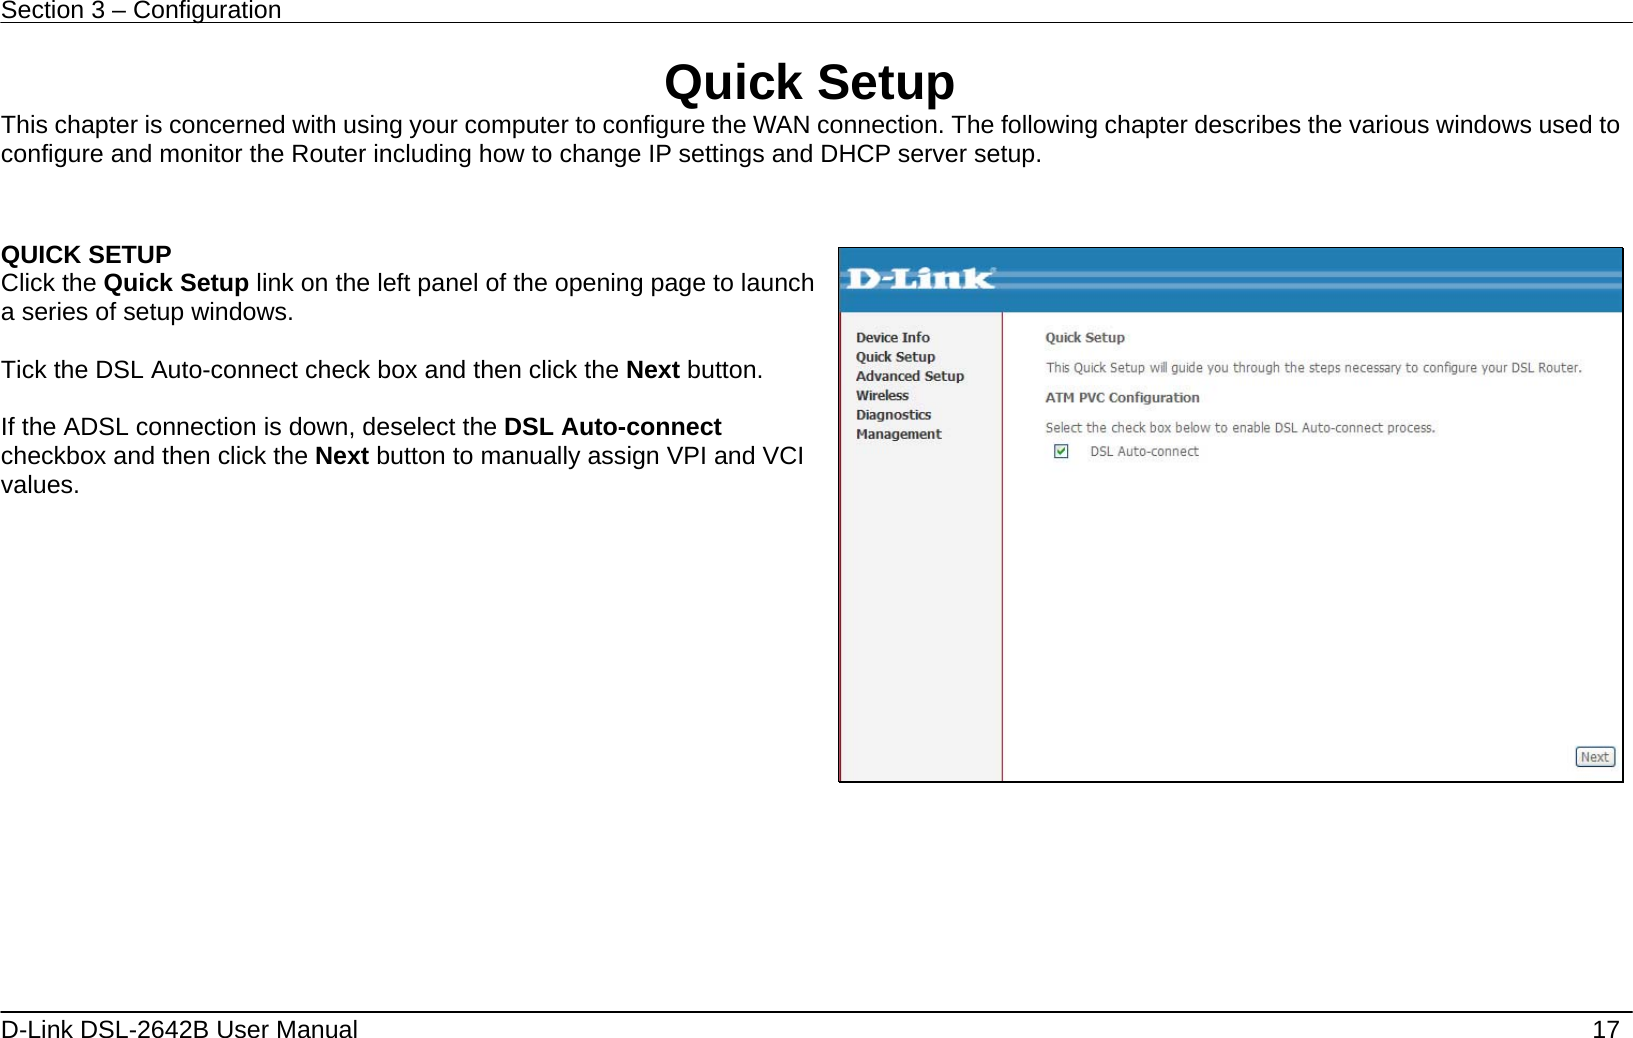 Section 3 – Configuration   D-Link DSL-2642B User Manual    17 Quick Setup This chapter is concerned with using your computer to configure the WAN connection. The following chapter describes the various windows used to configure and monitor the Router including how to change IP settings and DHCP server setup.  QUICK SETUP Click the Quick Setup link on the left panel of the opening page to launch a series of setup windows.  Tick the DSL Auto-connect check box and then click the Next button.    If the ADSL connection is down, deselect the DSL Auto-connect checkbox and then click the Next button to manually assign VPI and VCI values.      